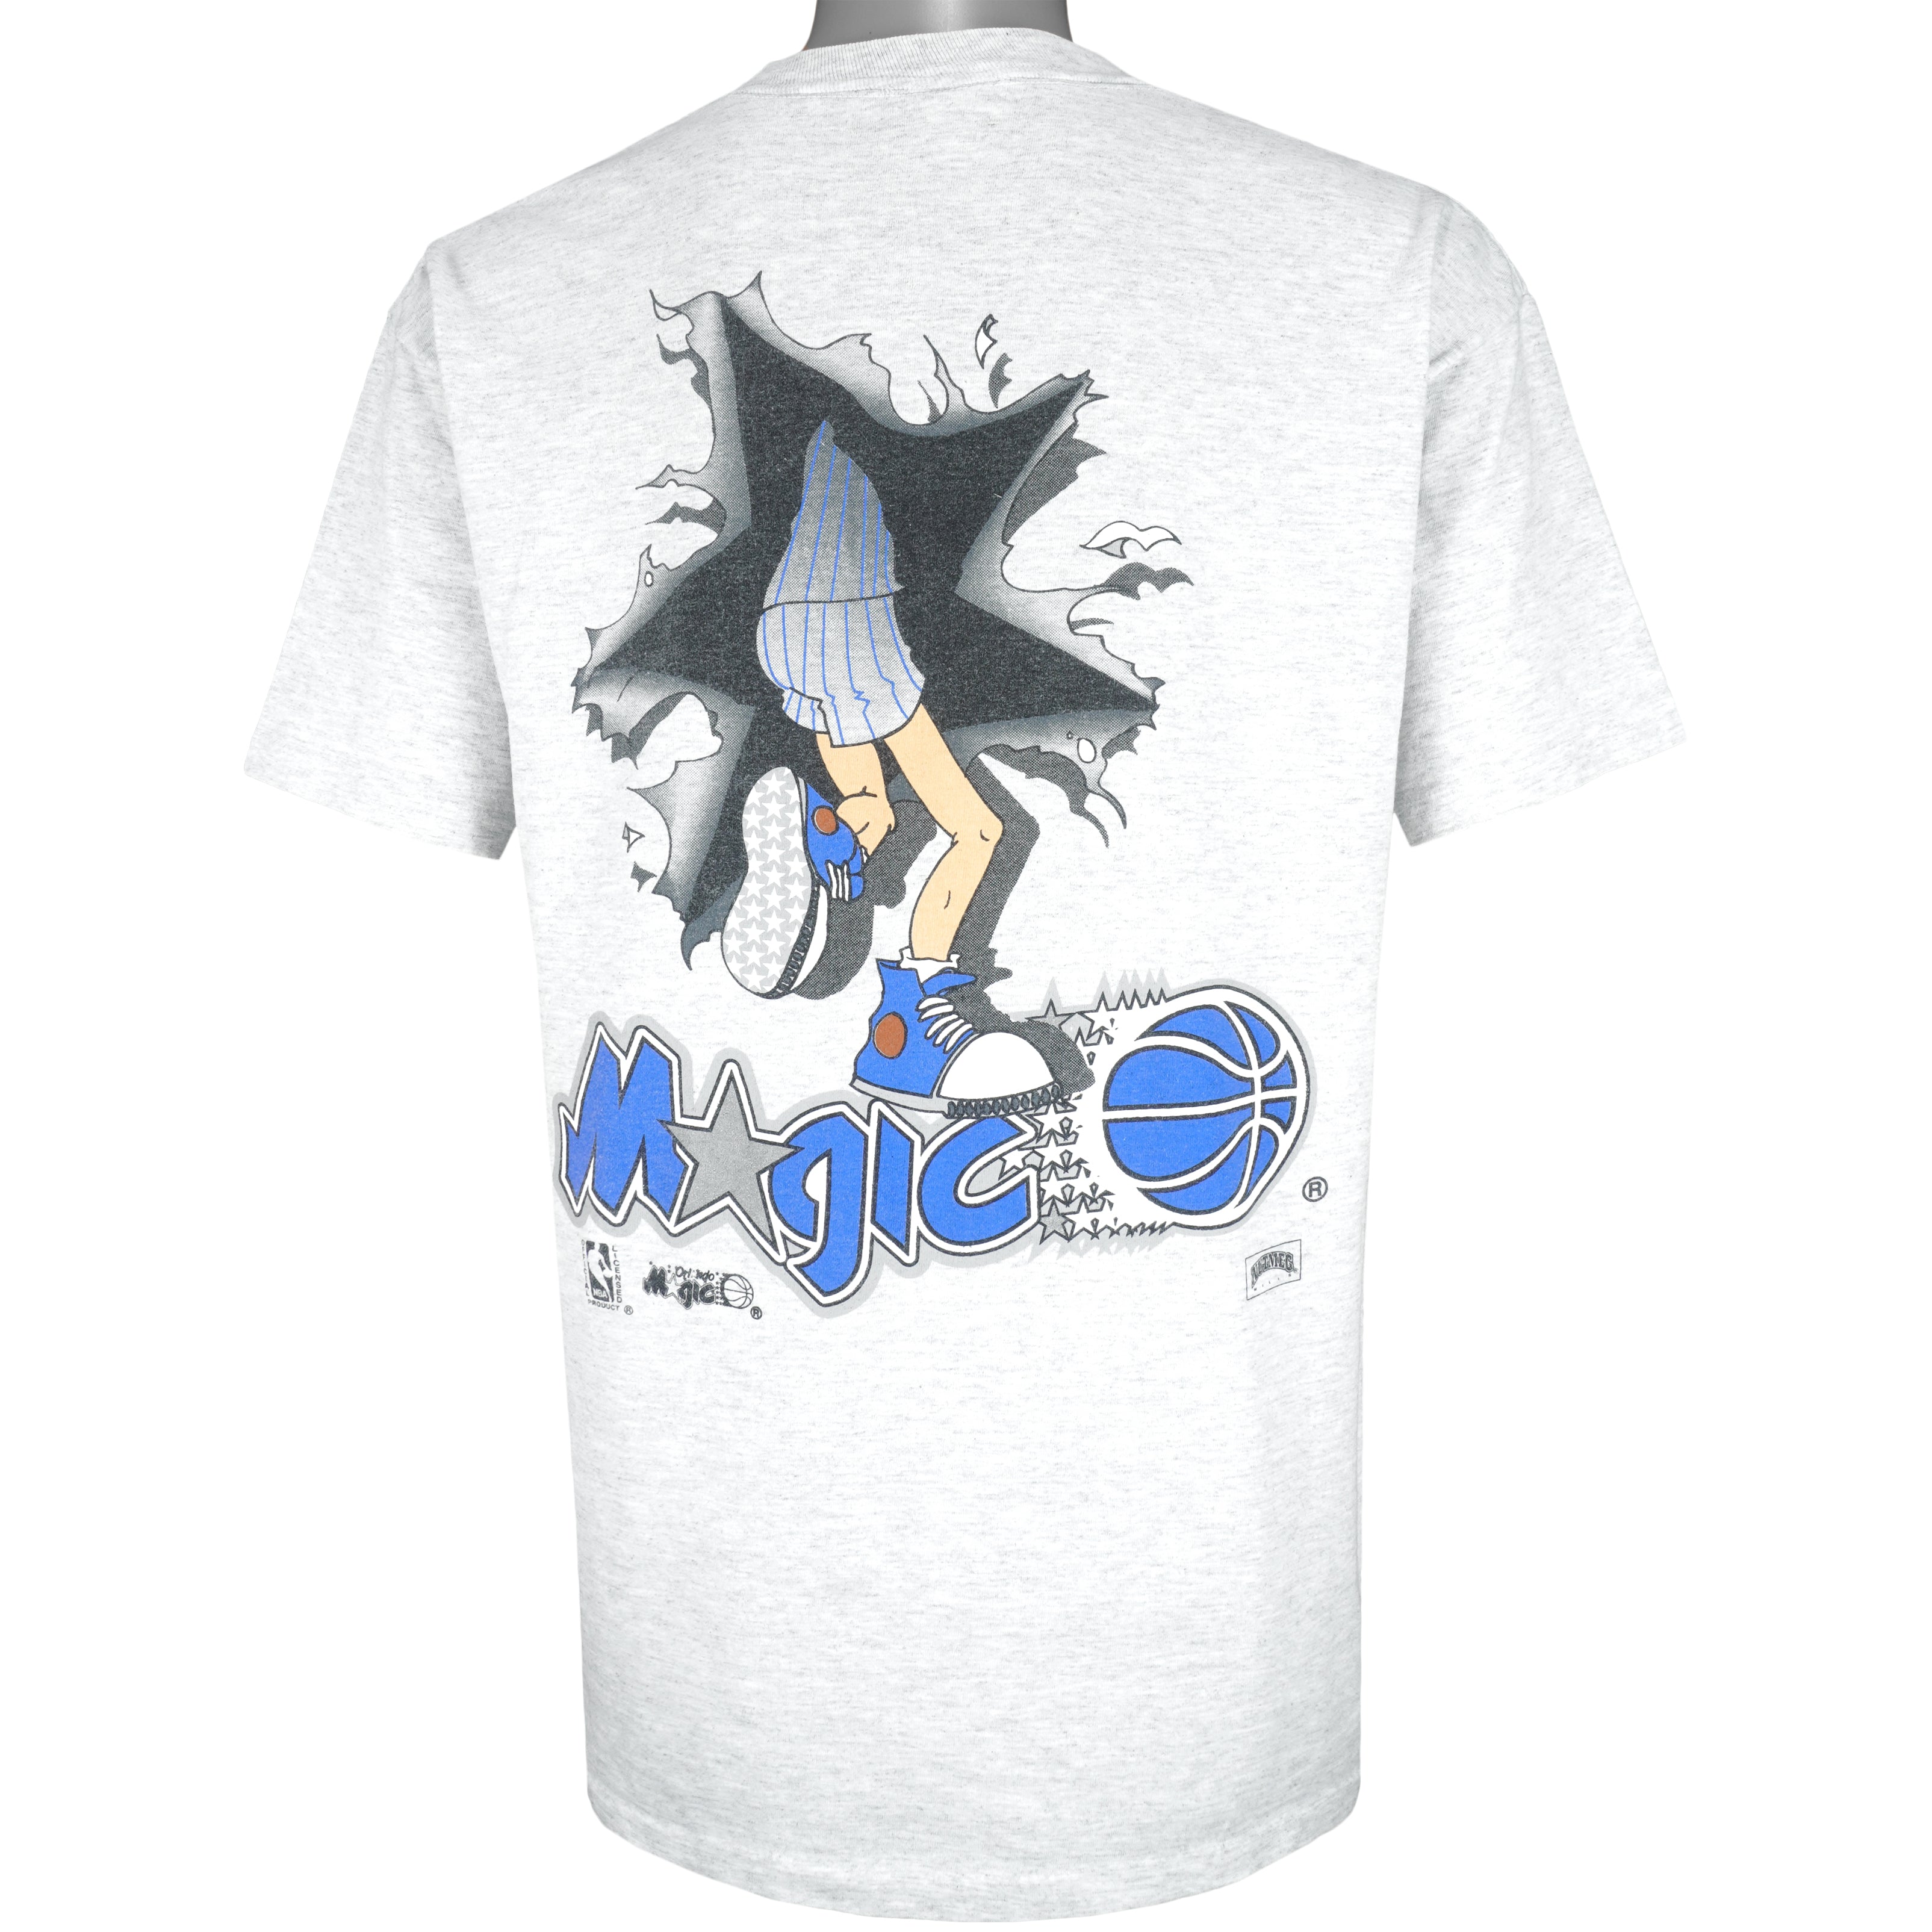 Upcycled Space Jam 1996 T-Shirt